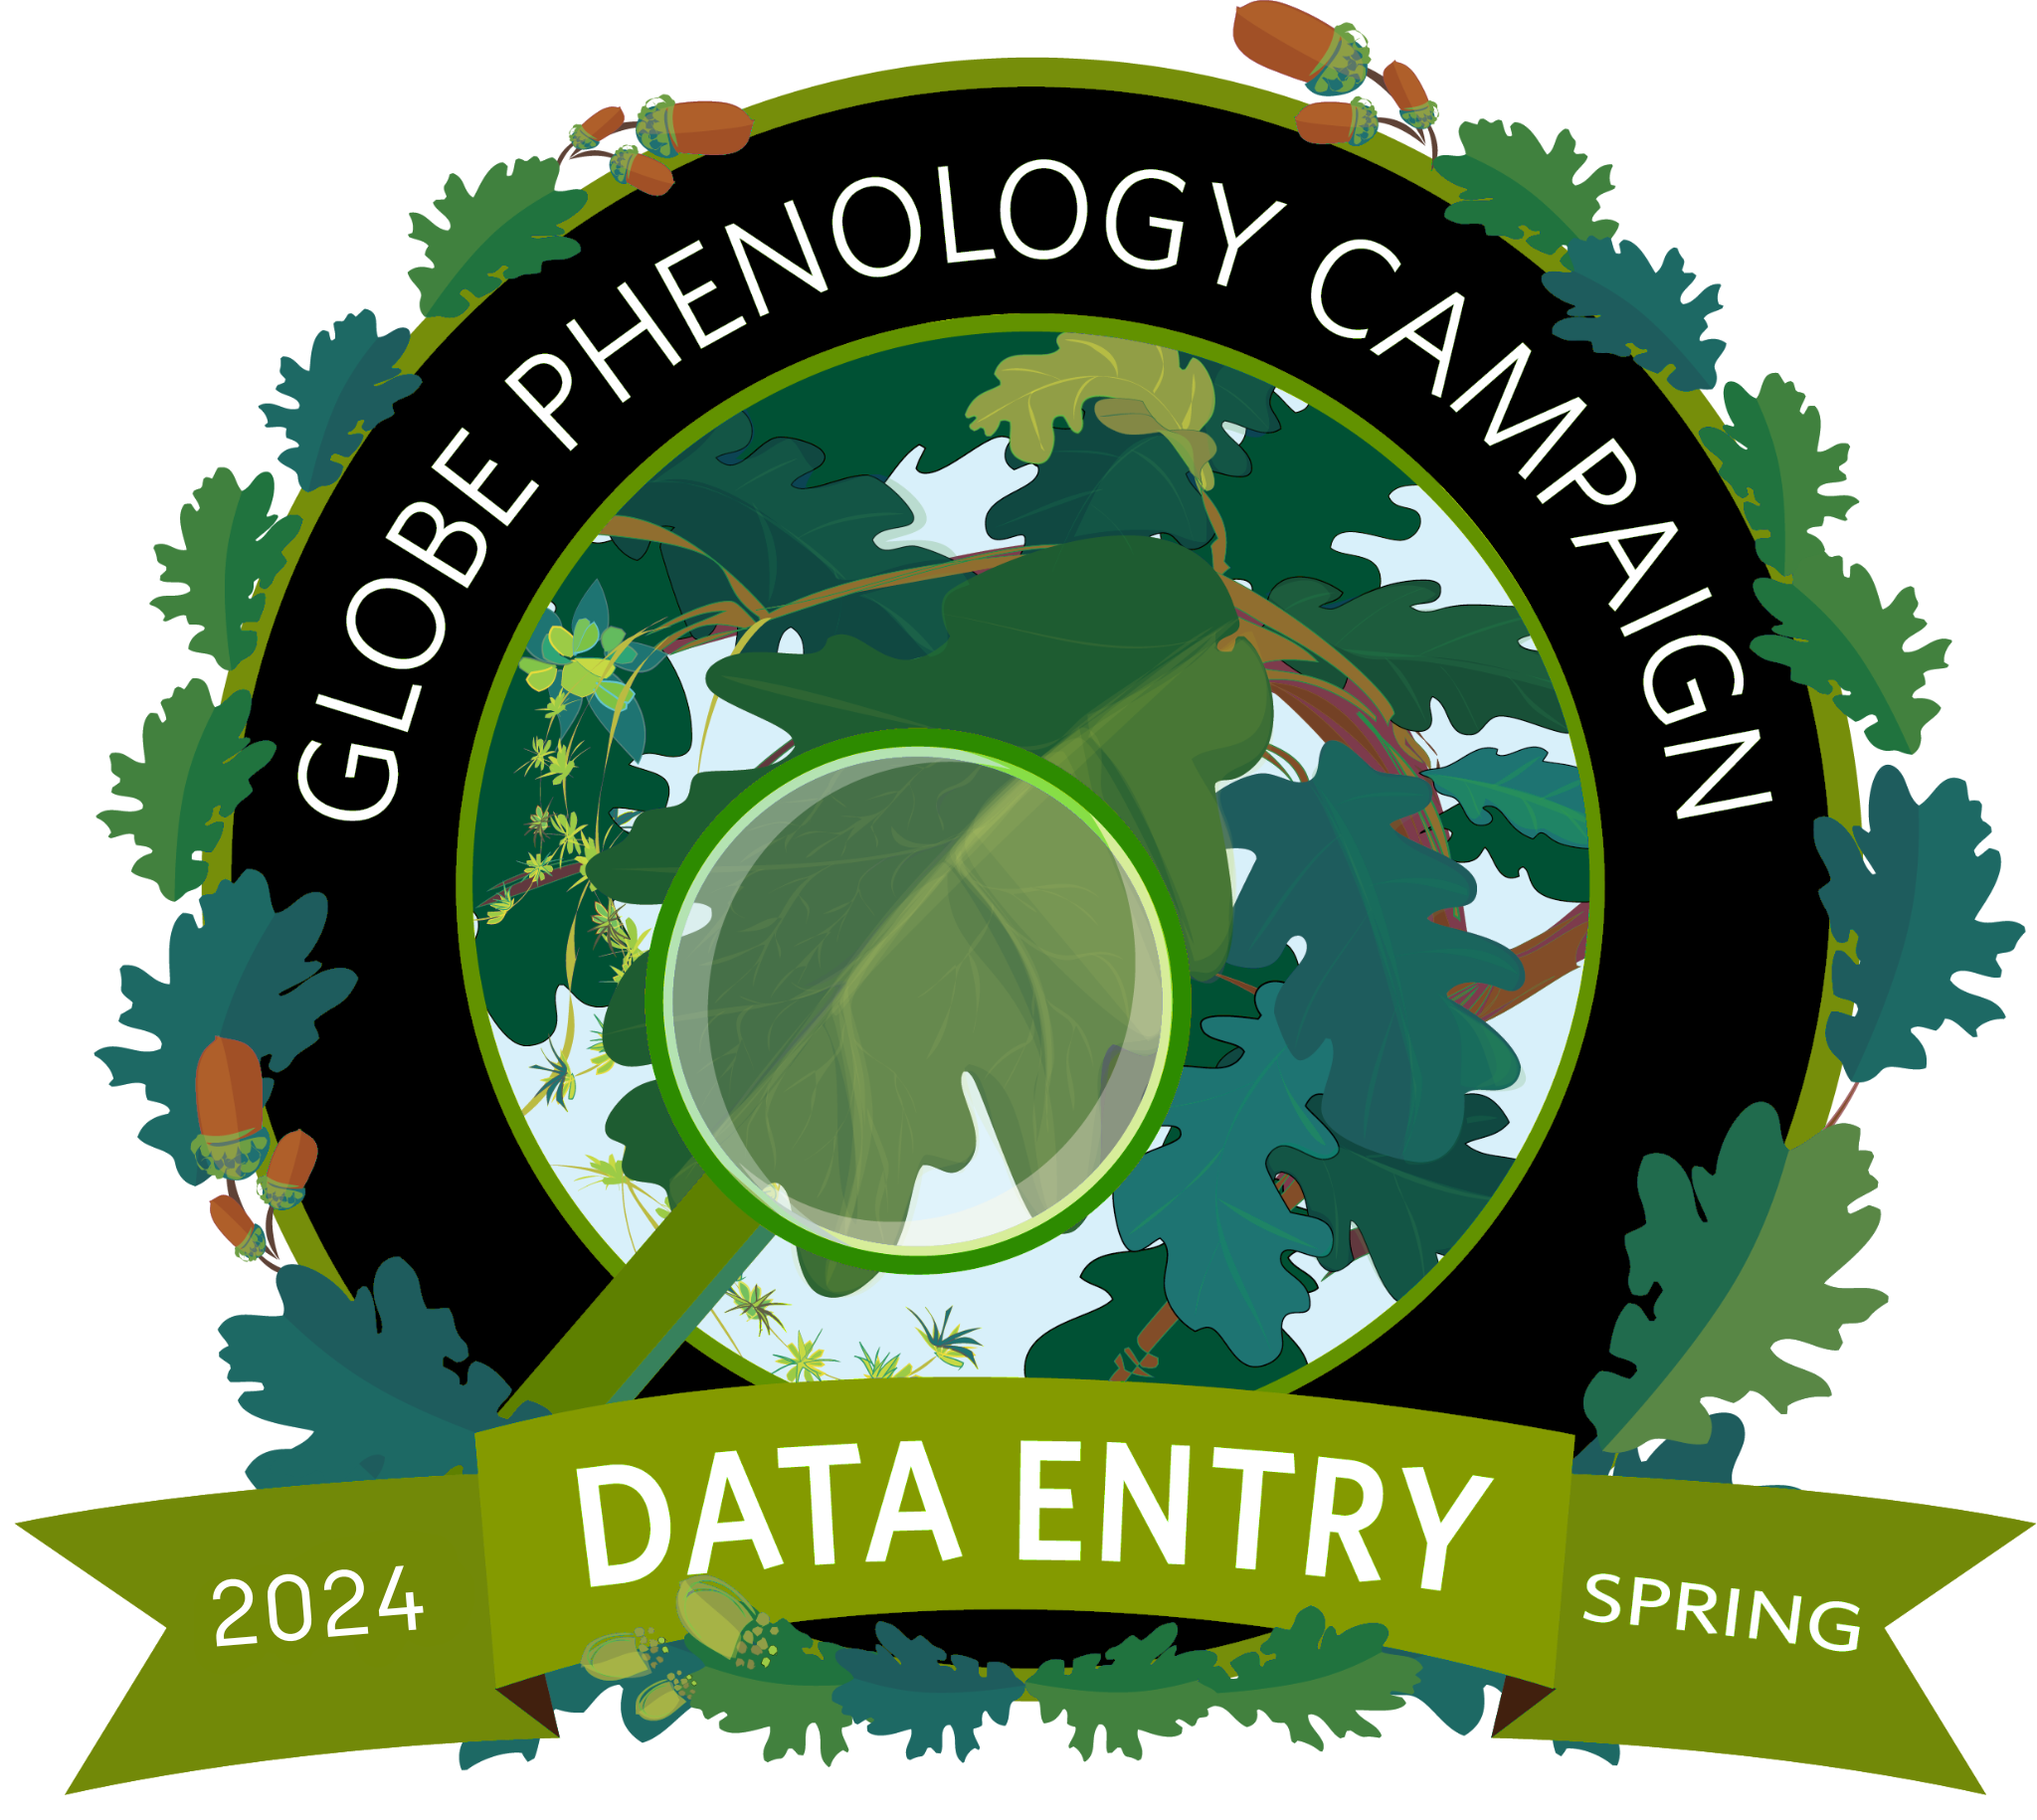 Data Entry digital badge for 2024 GLOBE Spring Phenology Campaign